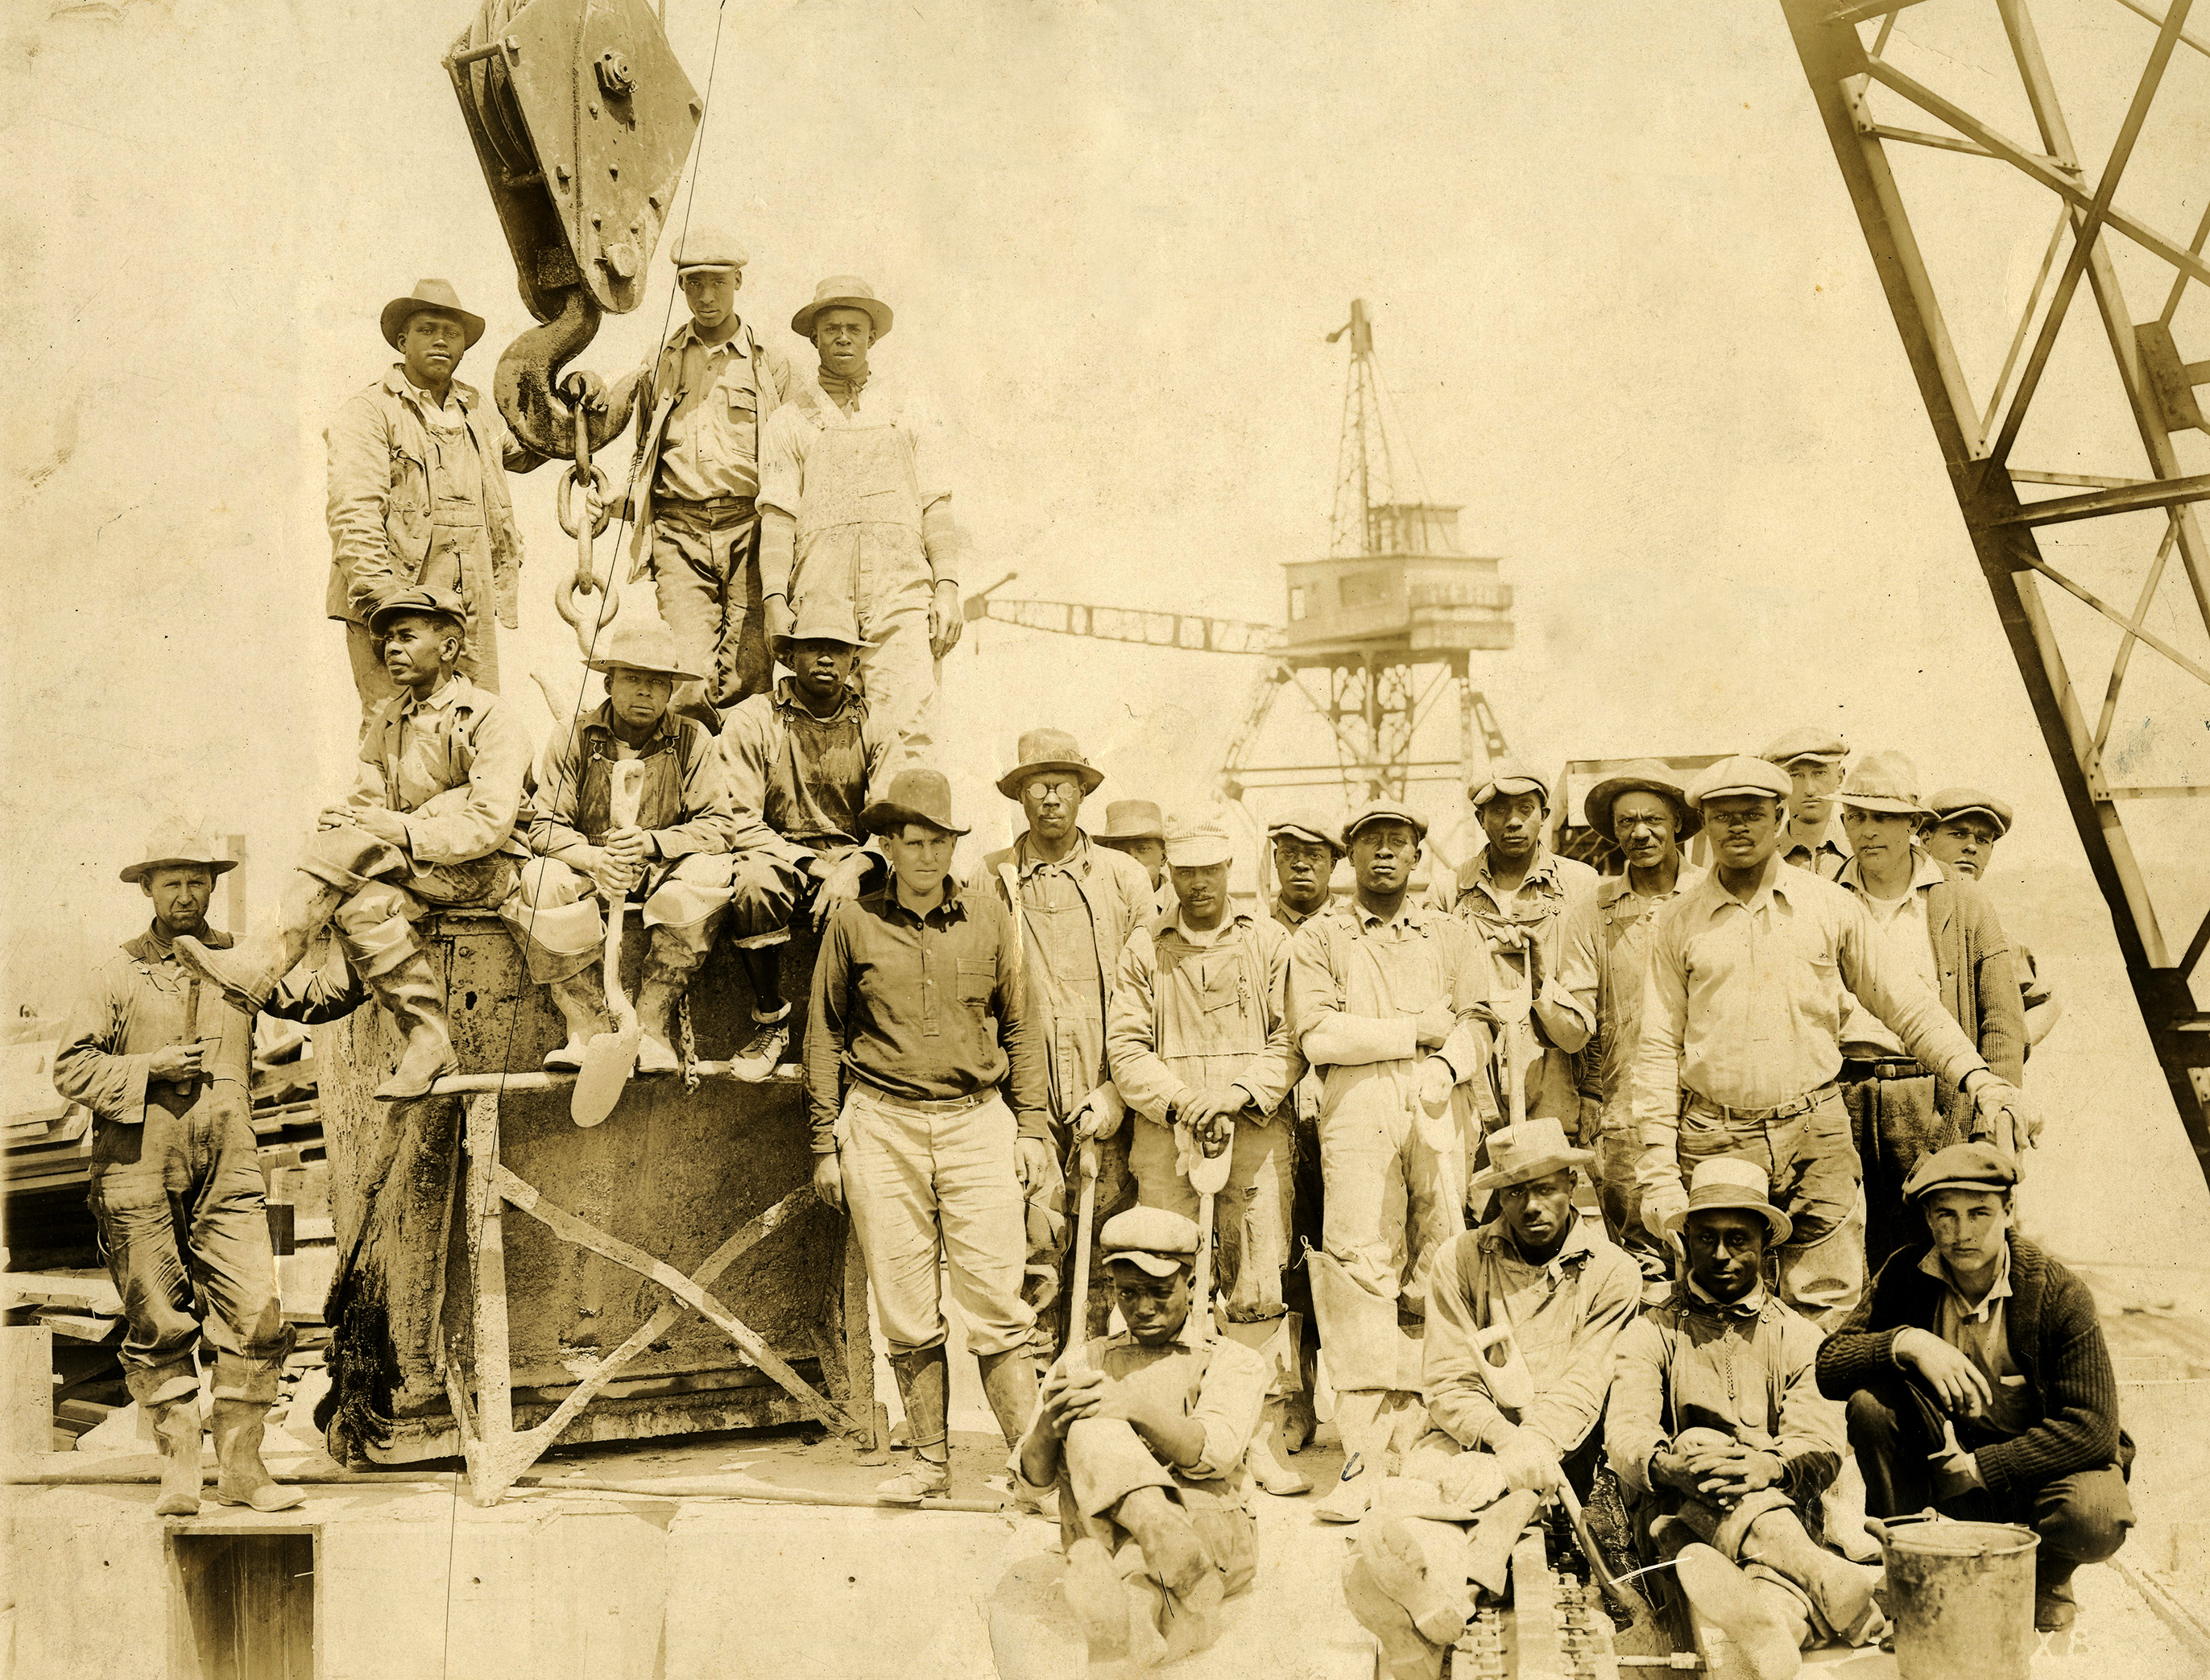 Several workers stand around heavy equipment